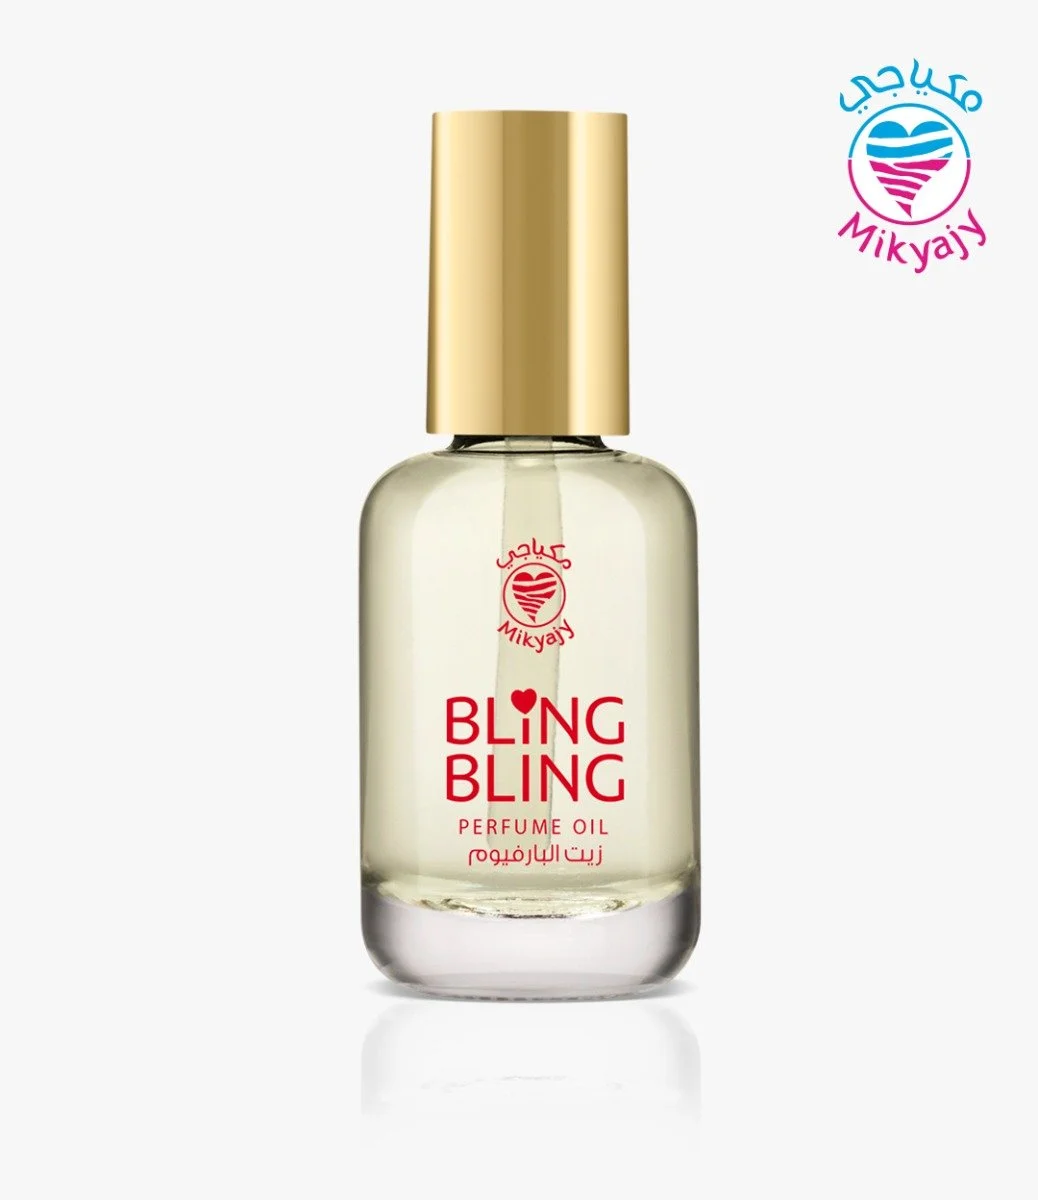 Bling Bling Fragrance Collection 3 Pieces by Mikyajy*